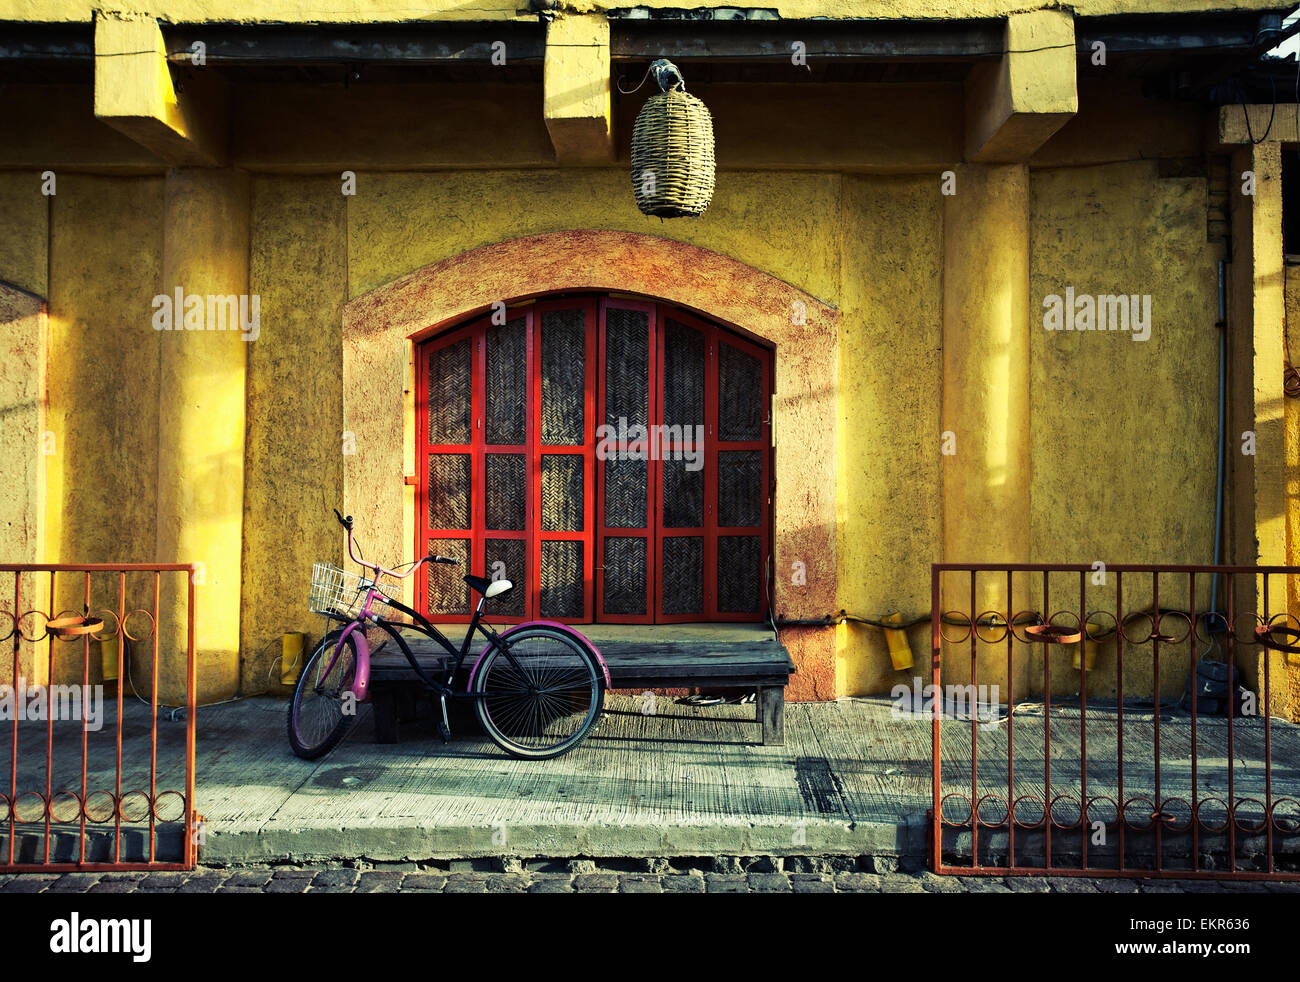 A bicycle parked outside the door of a cafe in a Mexican town. Stock Photo